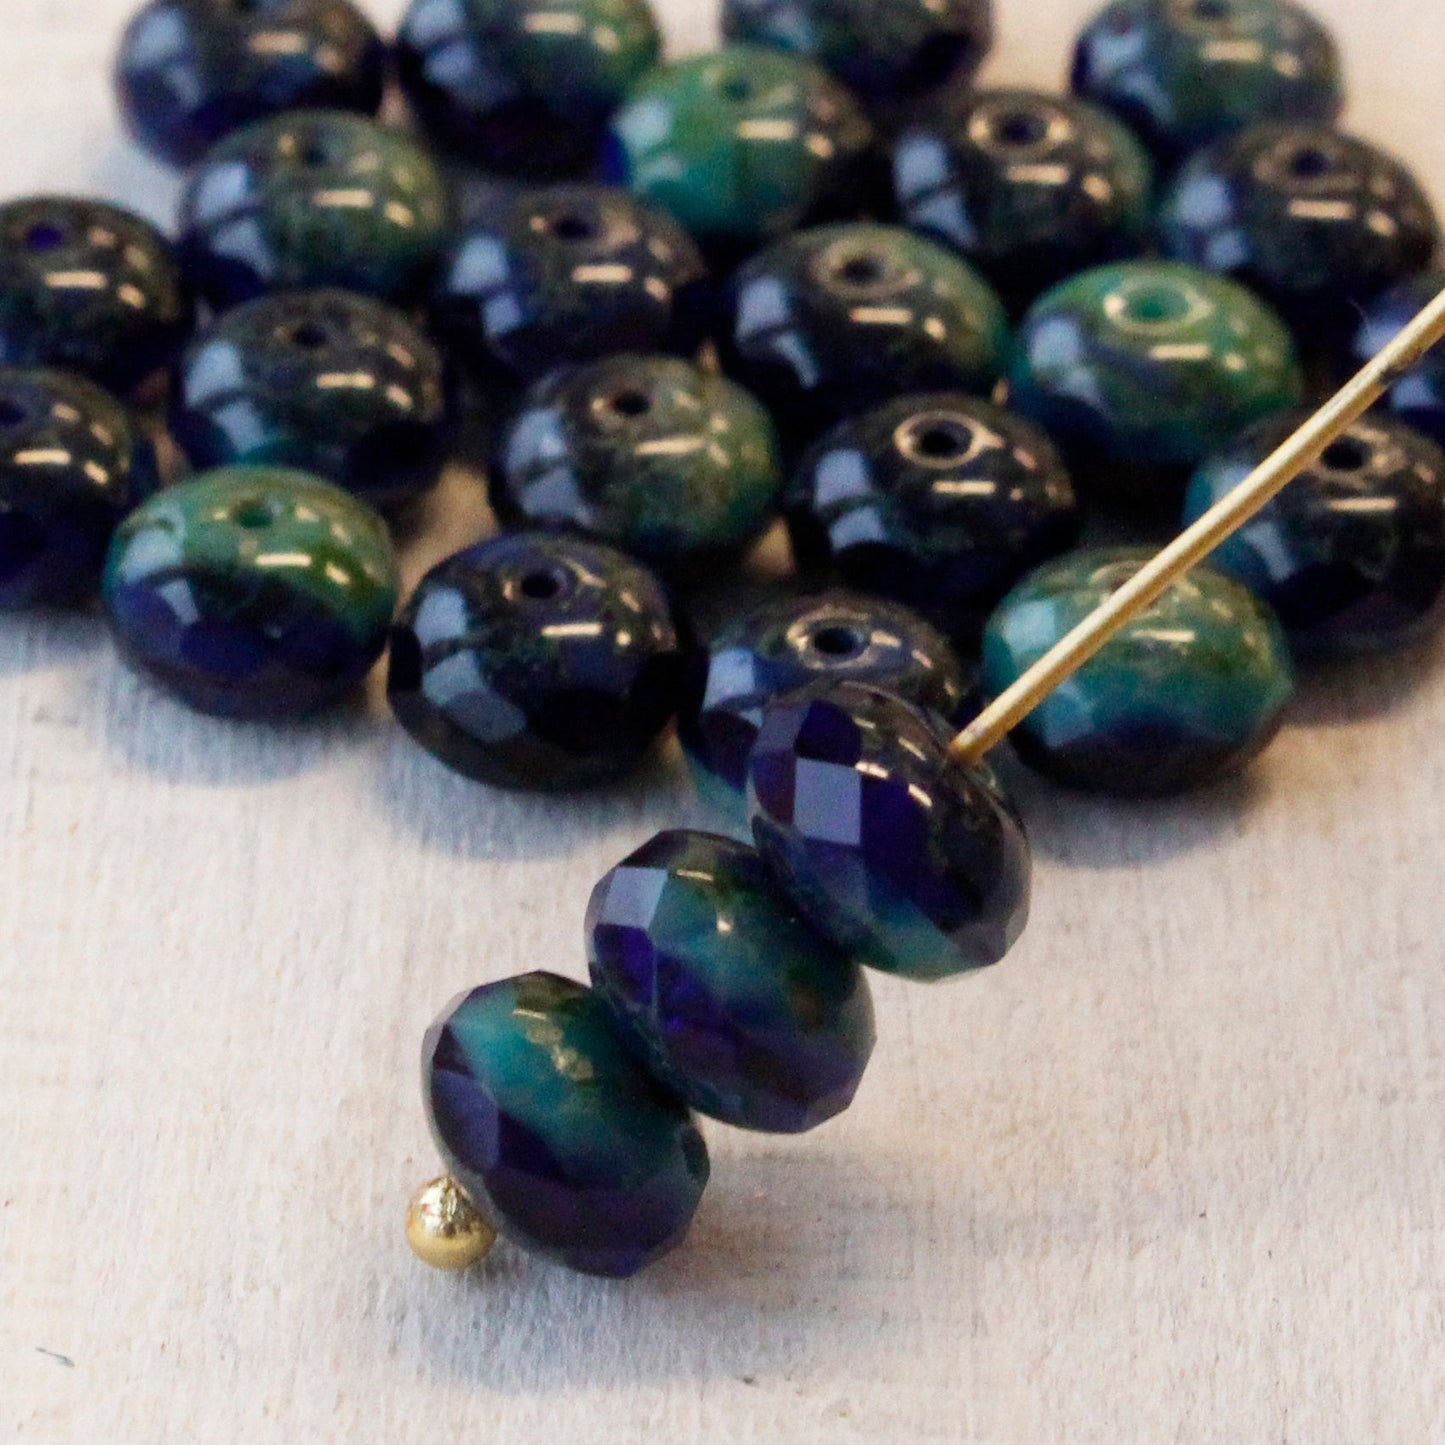 6x9mm Rondelle Beads - Opaque Cobalt and Turquoise with Bronze - 25